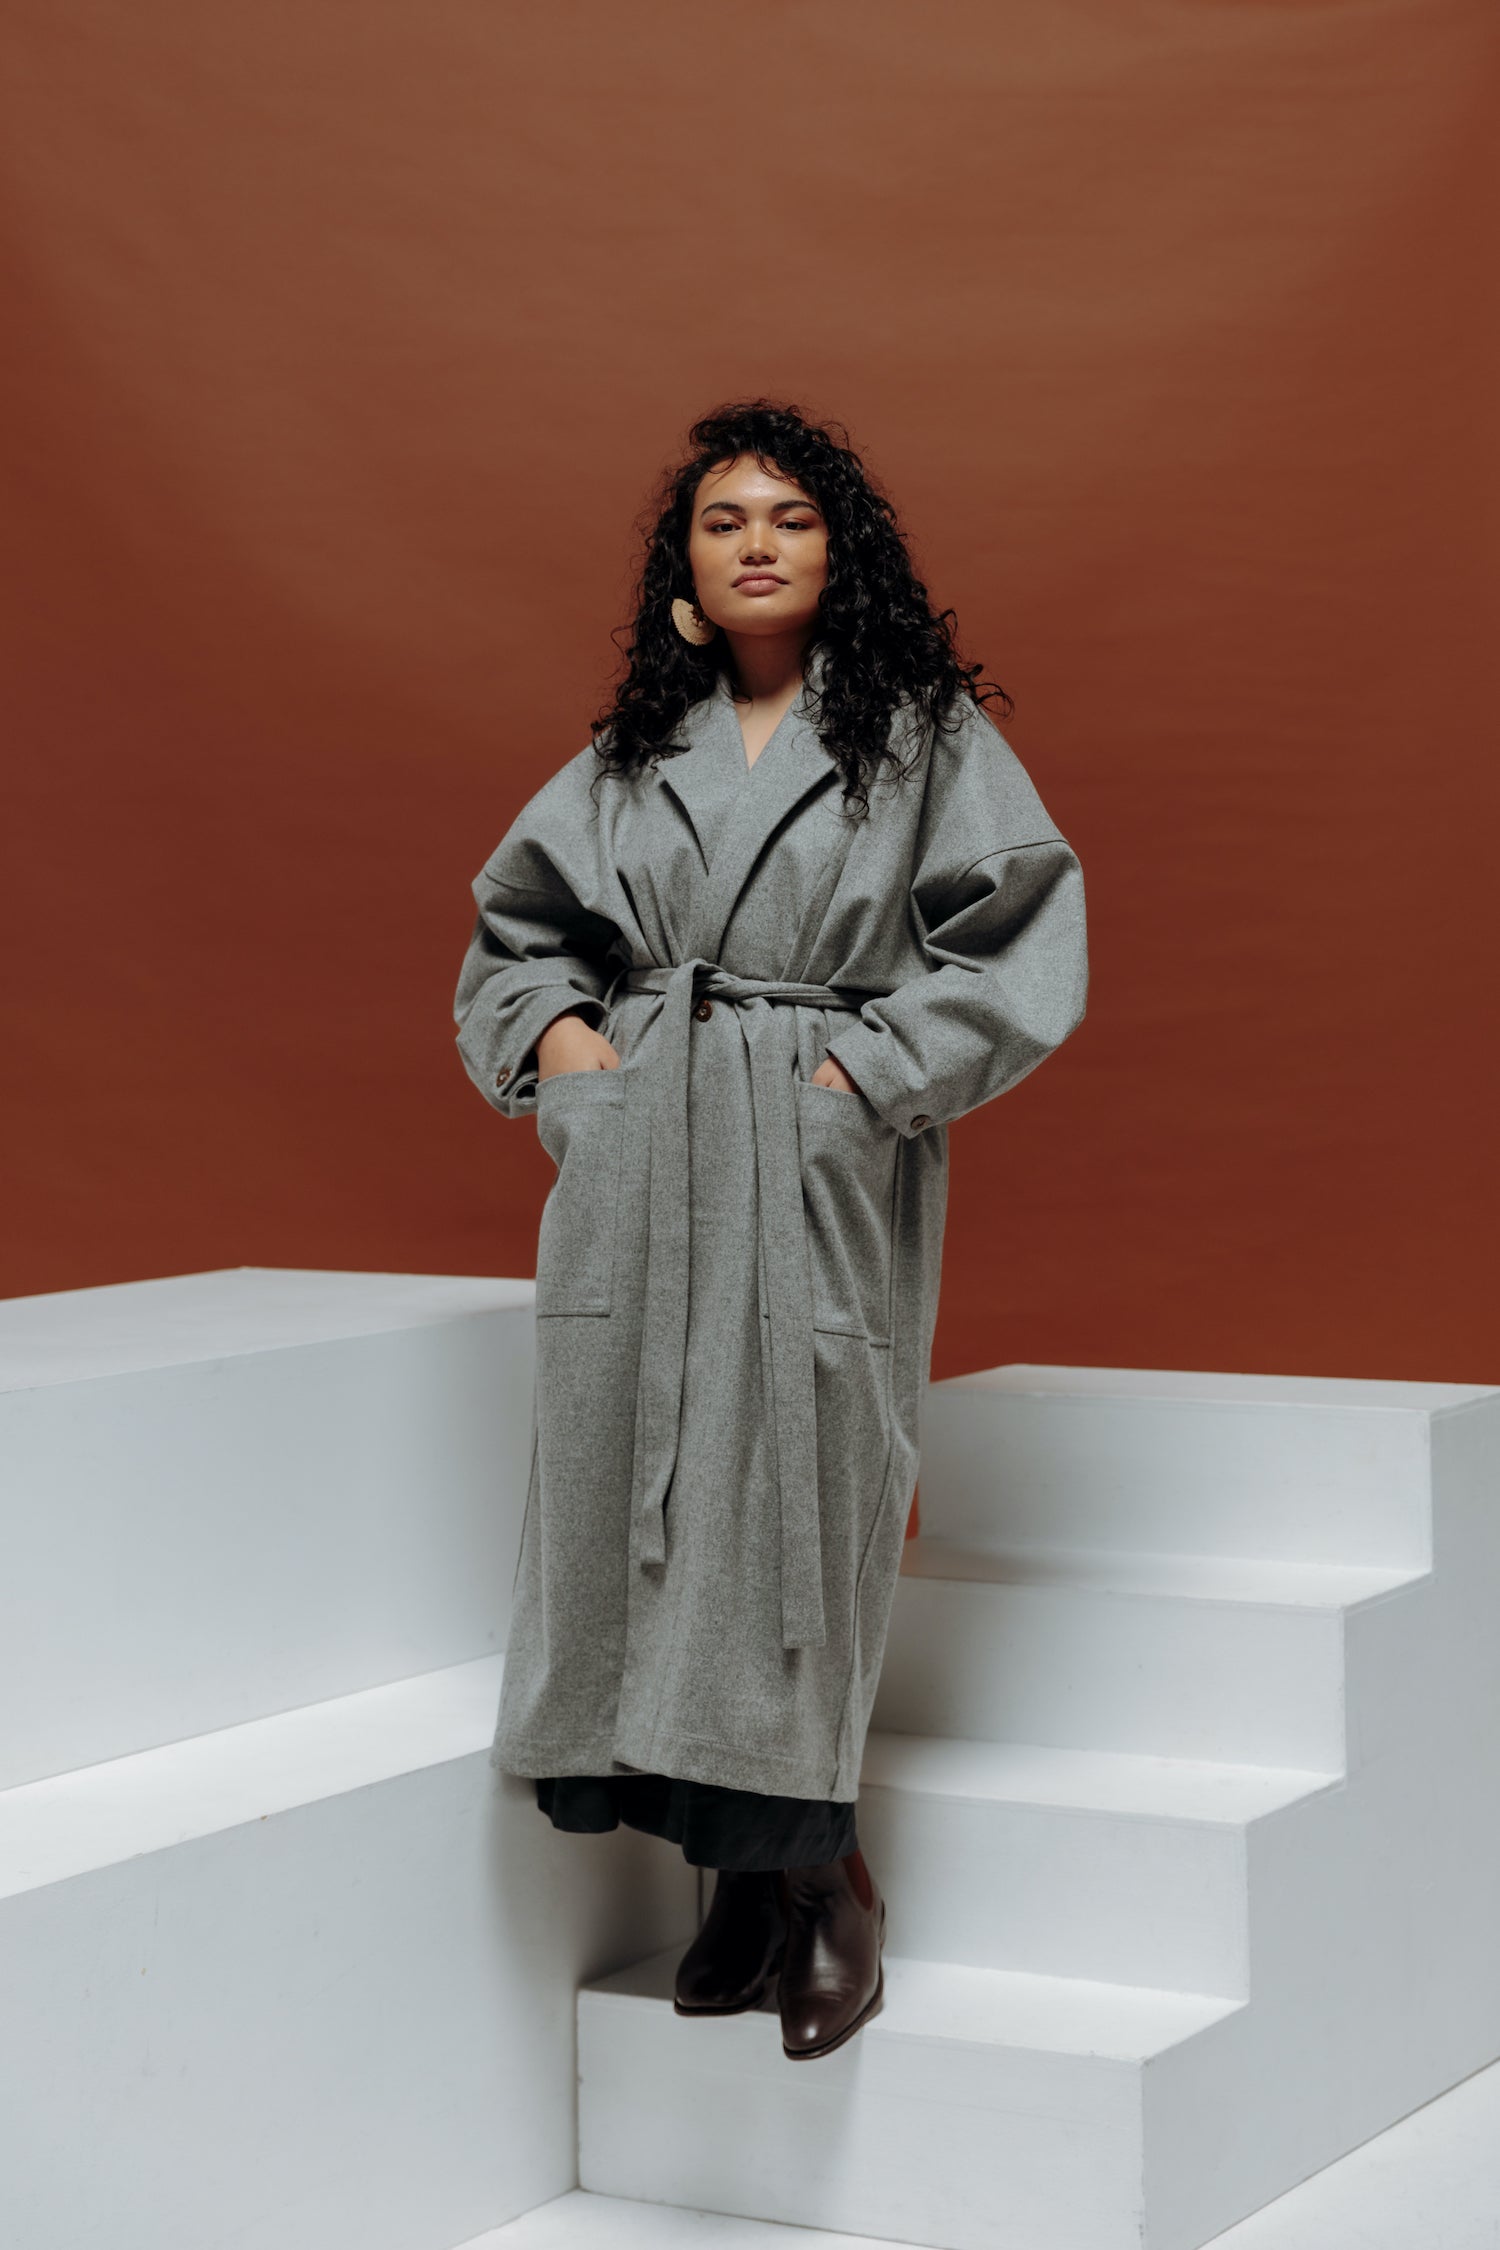 Jalaina wearing a long grey wool coat with hands in pockets